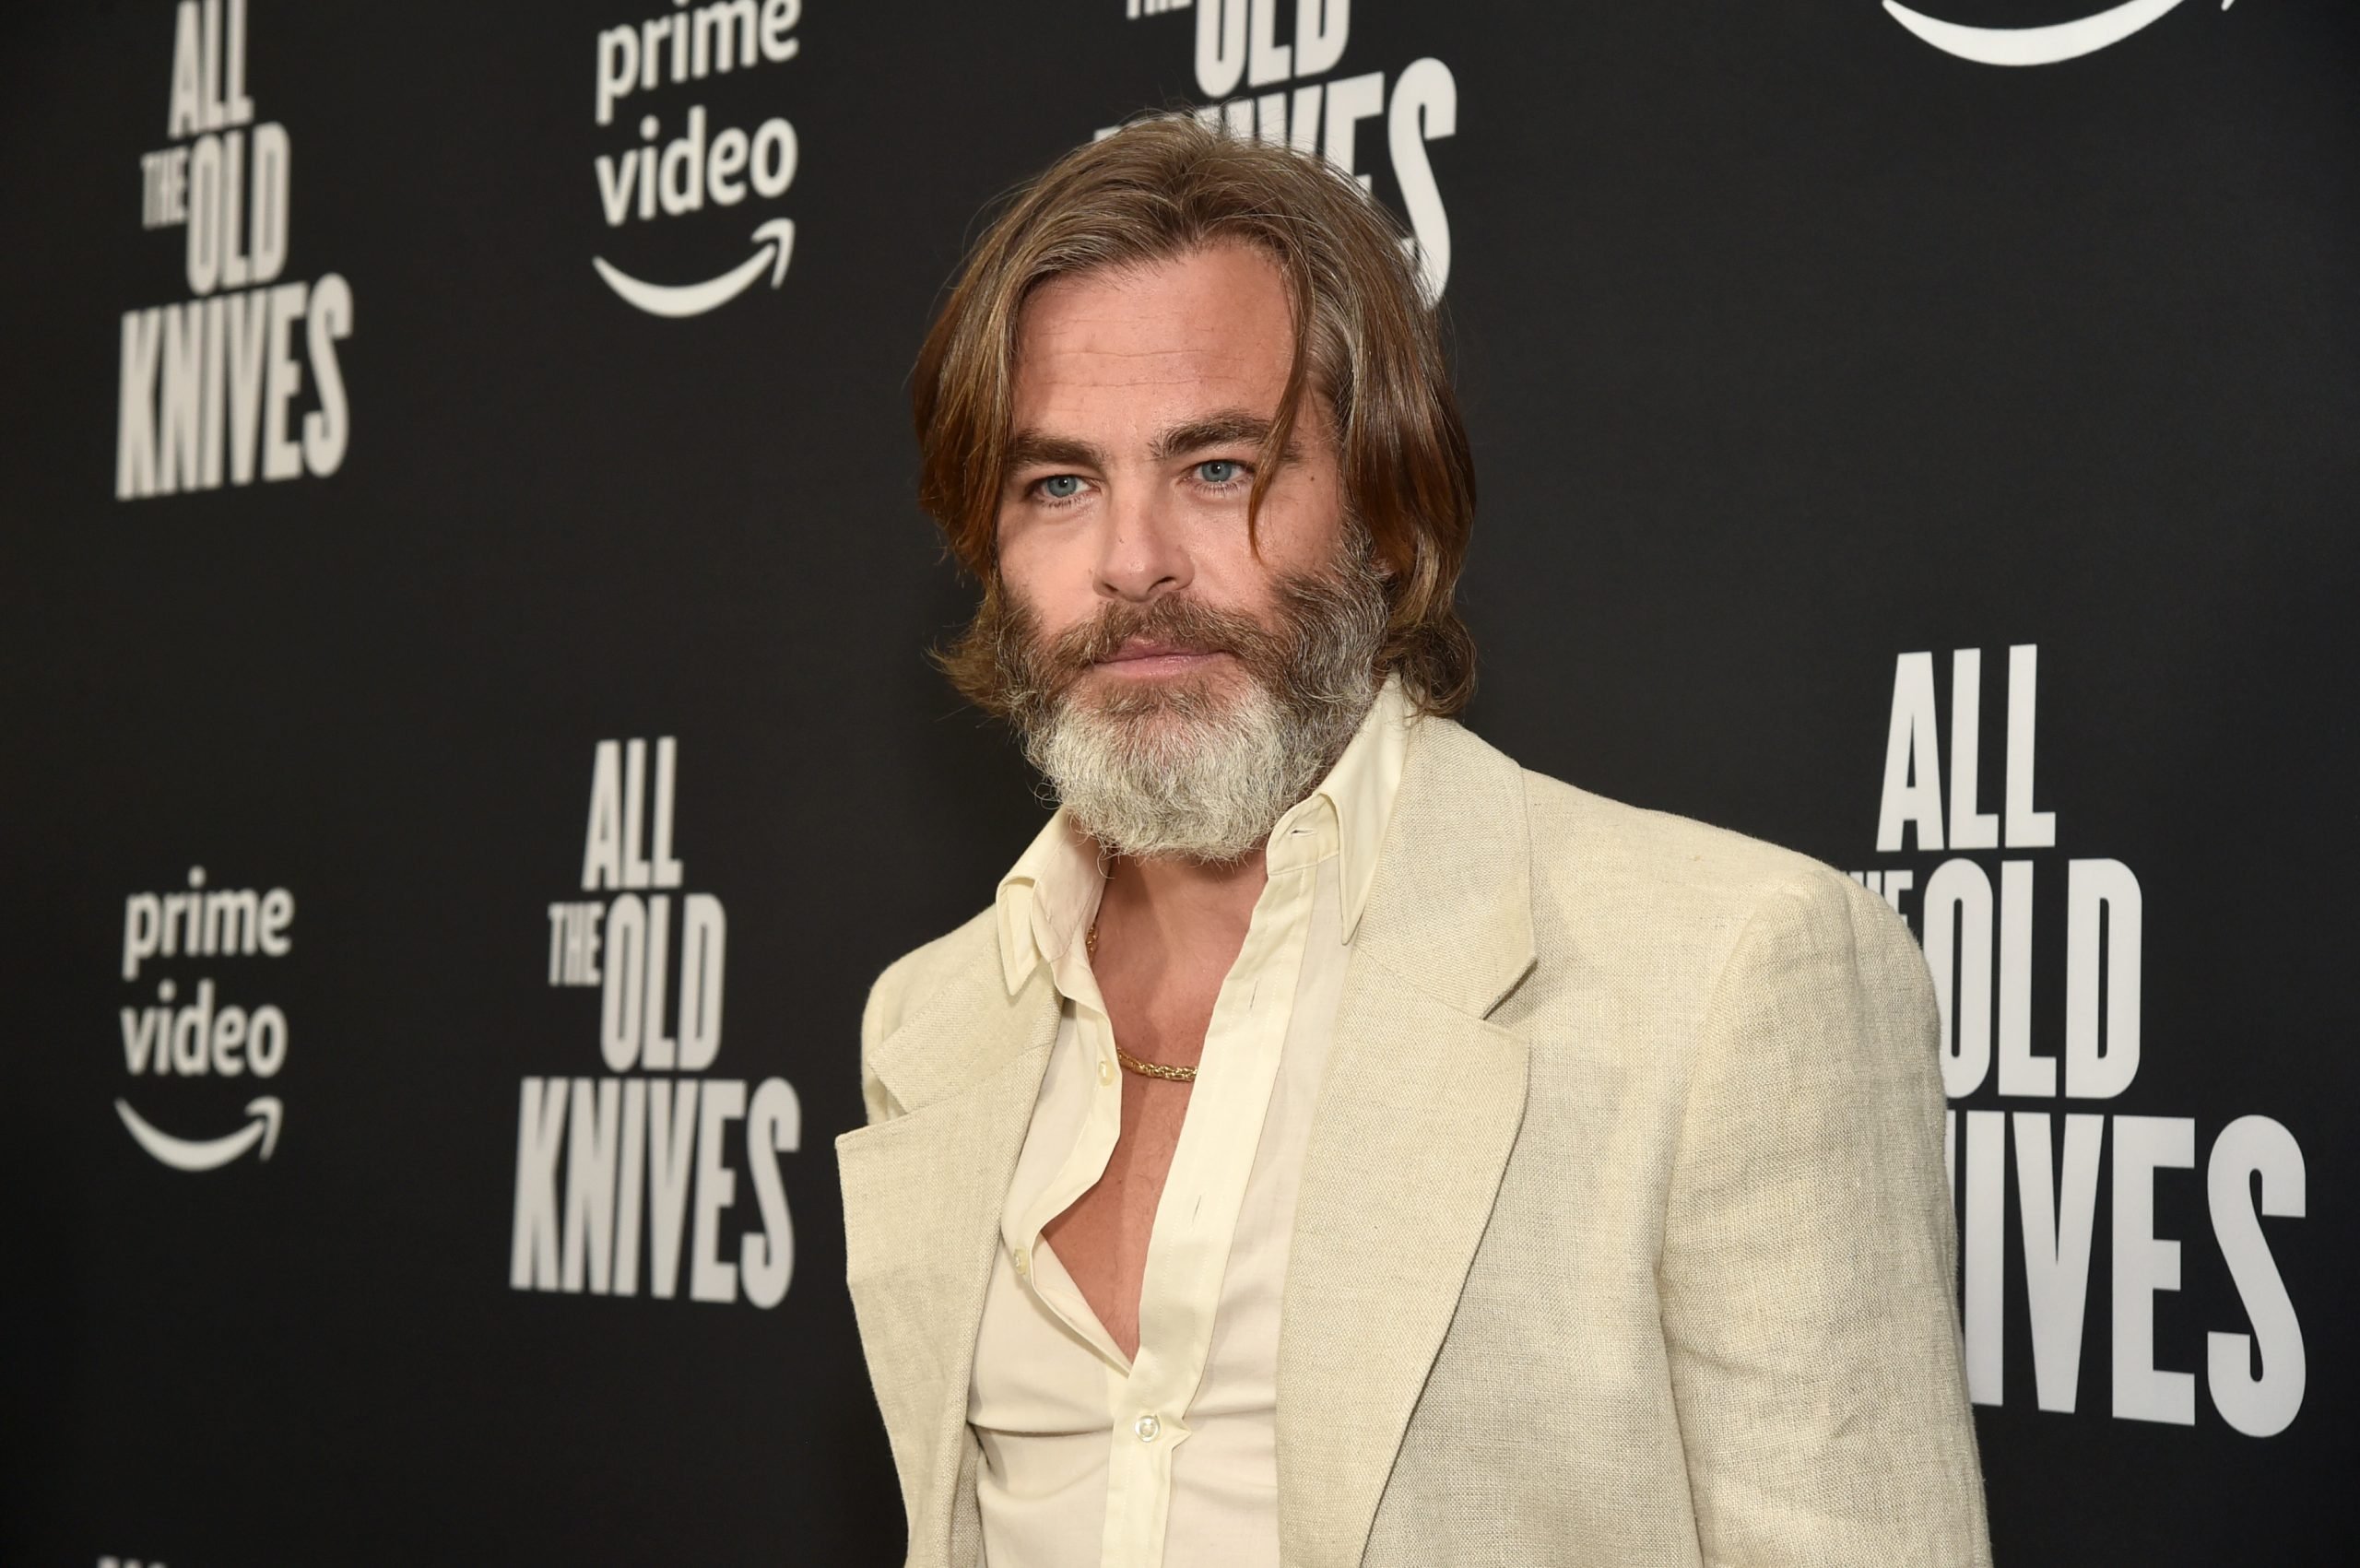 Chris Pine Reacts to His Family’s Connection to Quentin Tarantino’s Movie ‘Once Upon a Time in Hollywood’